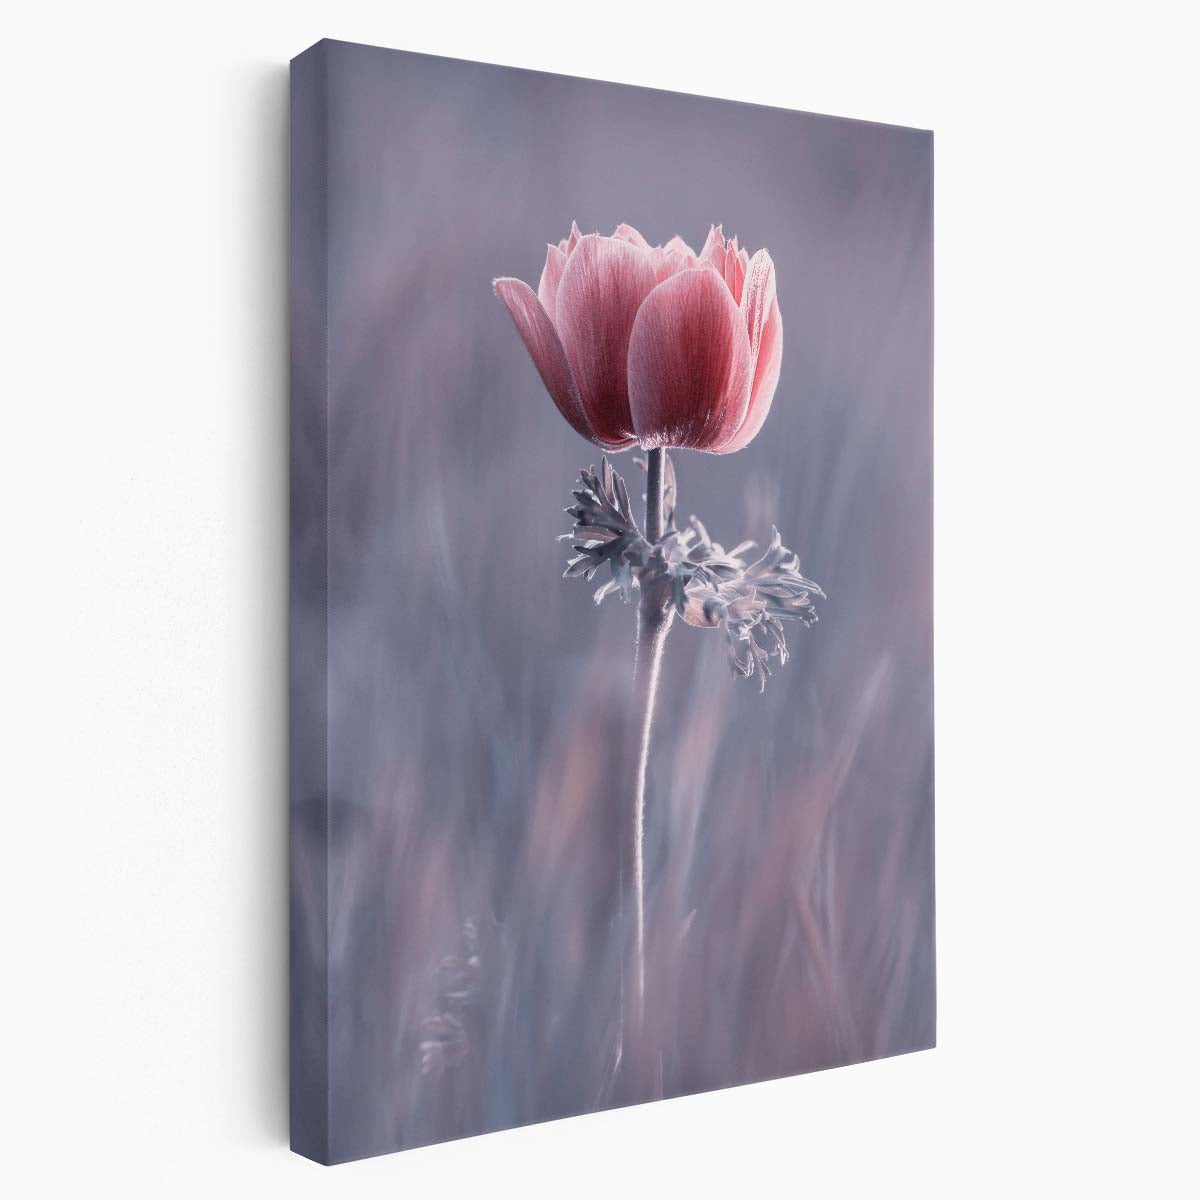 Romantic Pink Floral Macro Photography Close-Up Botanical Flower Wall Art by Luxuriance Designs, made in USA